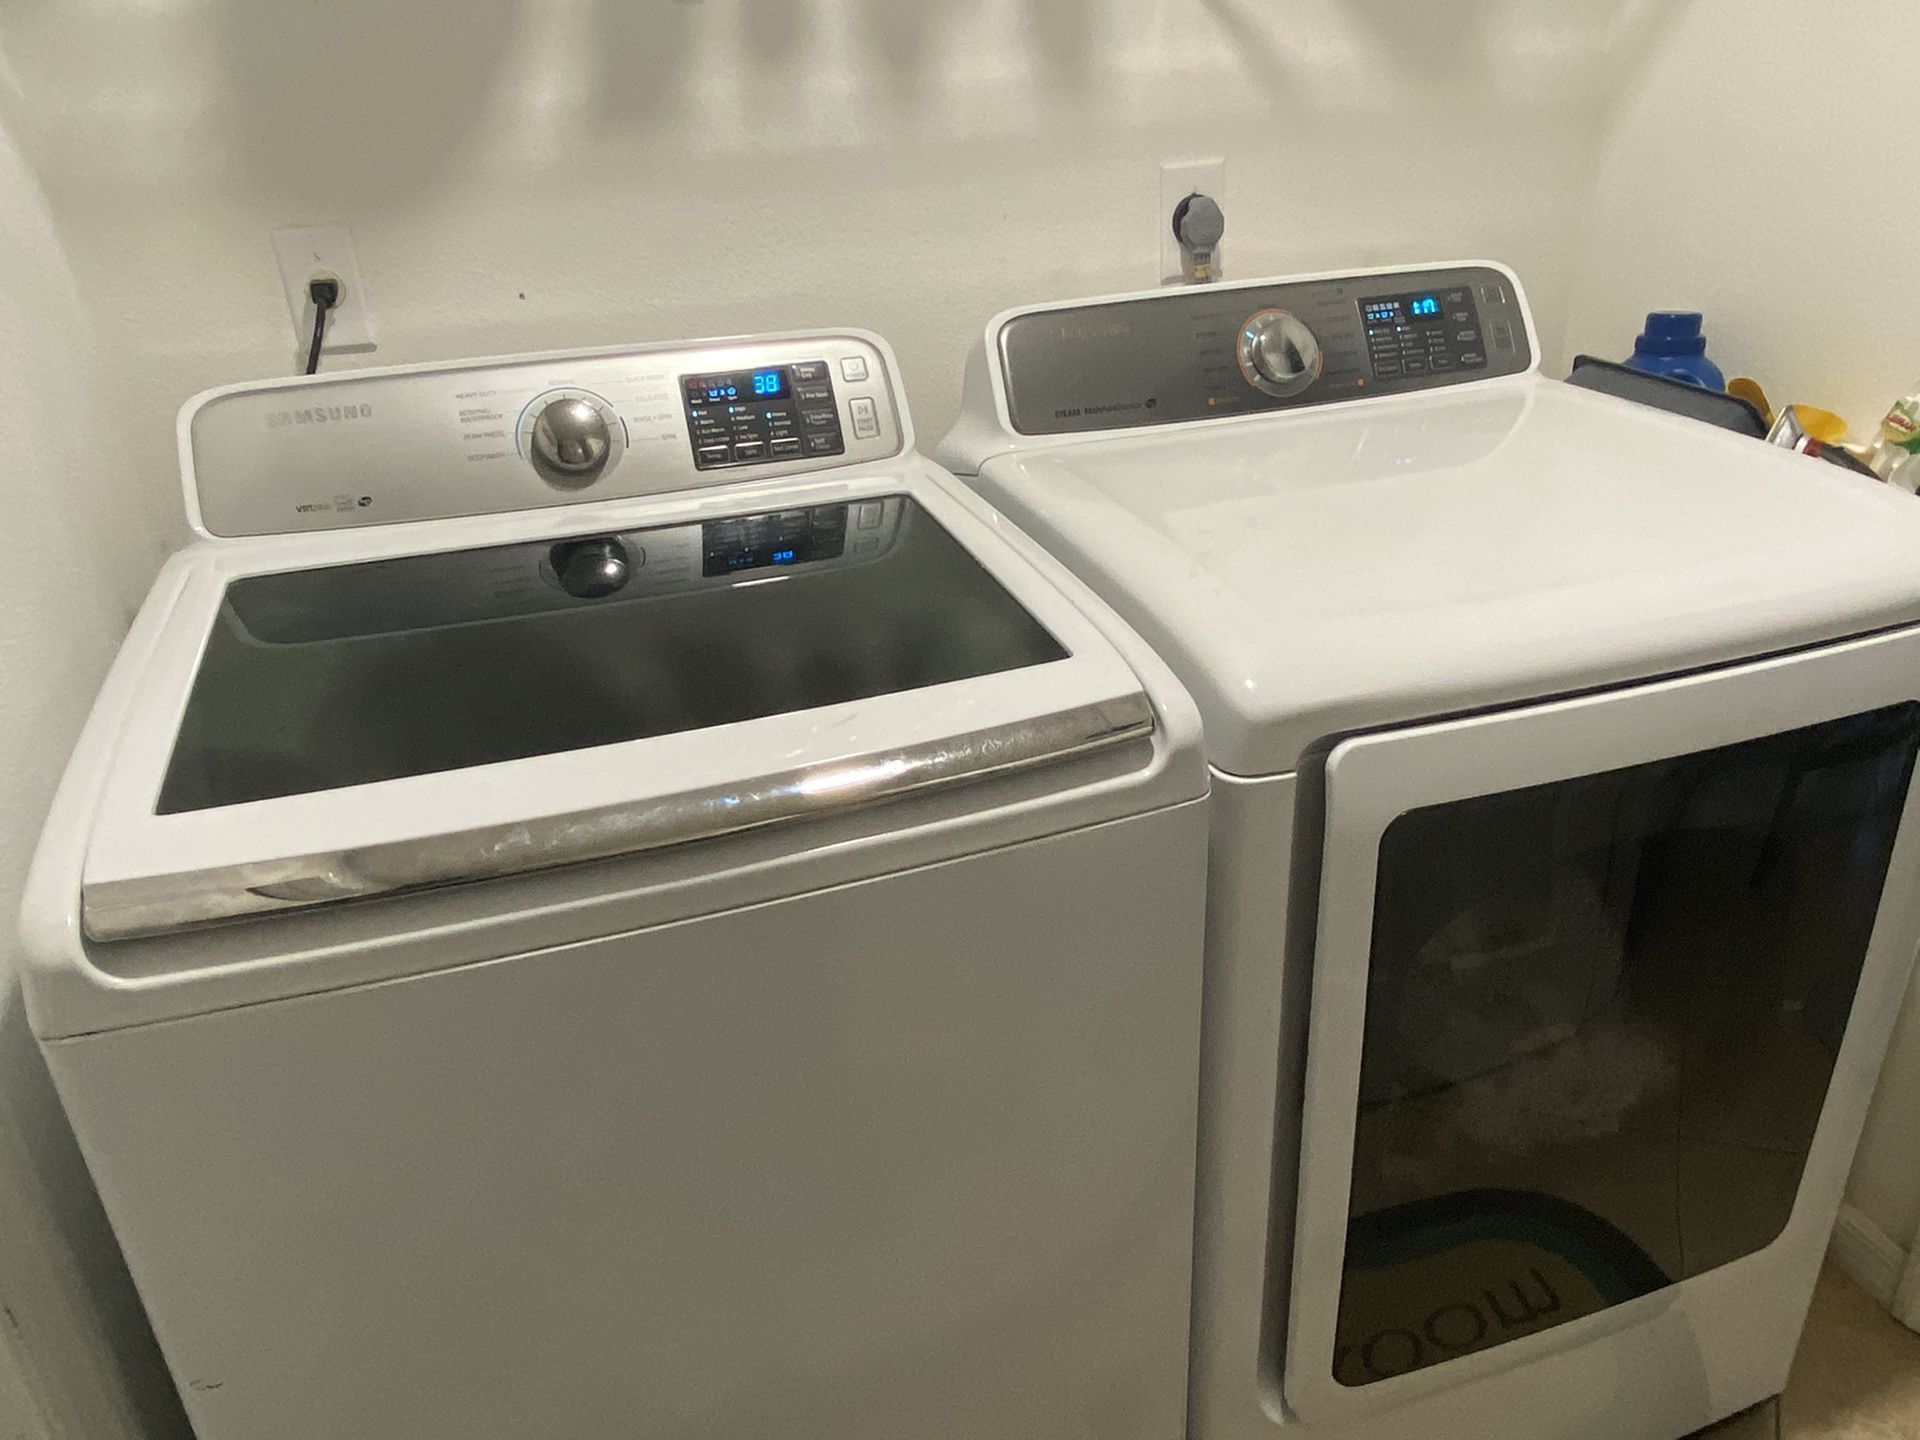 Samsung Washer and Electric Dryer Model VRTPlus